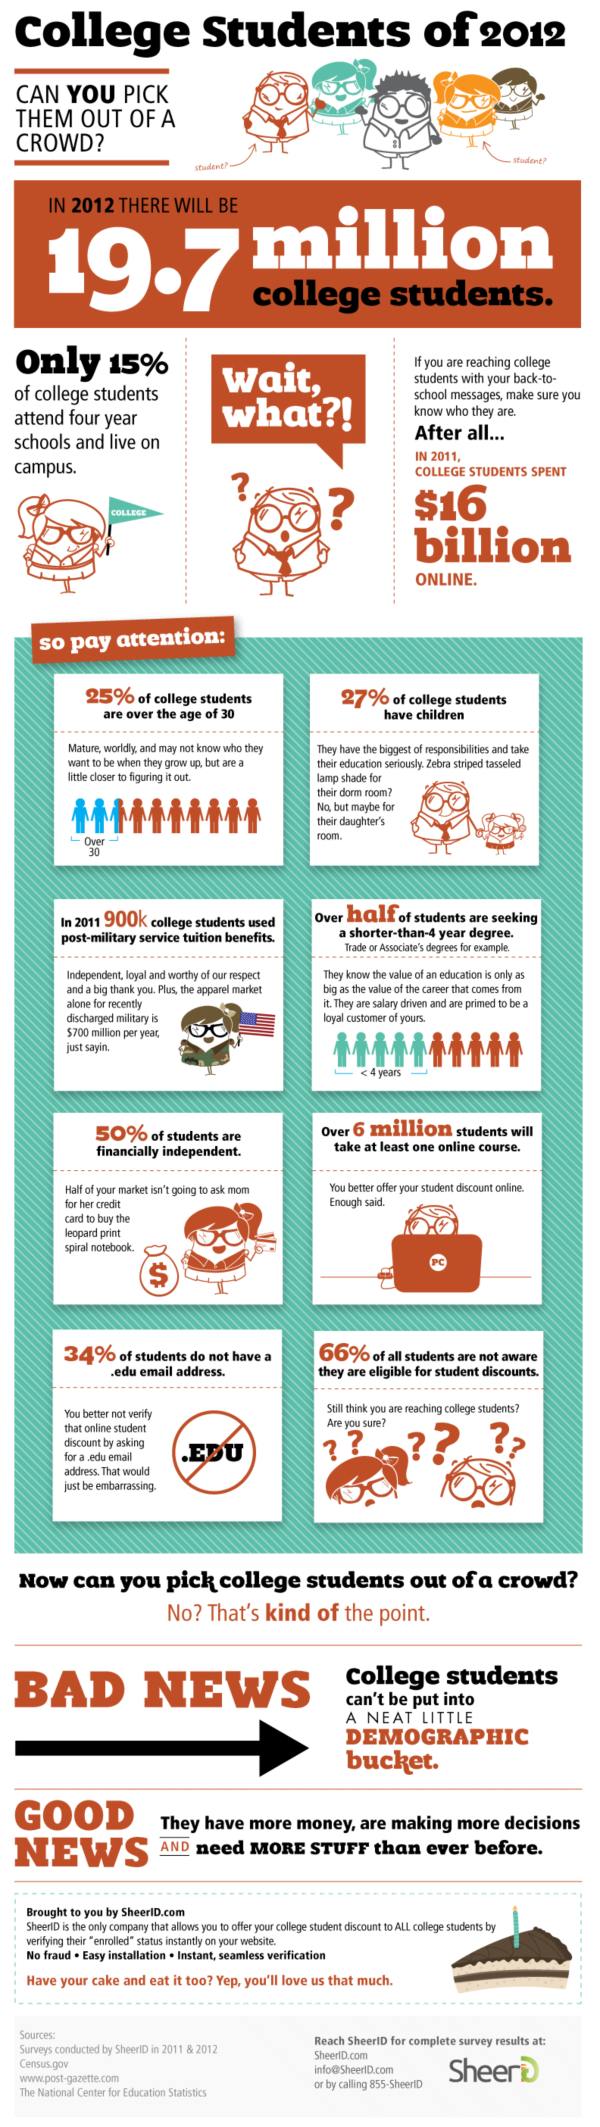 College Students of 2012 infographic